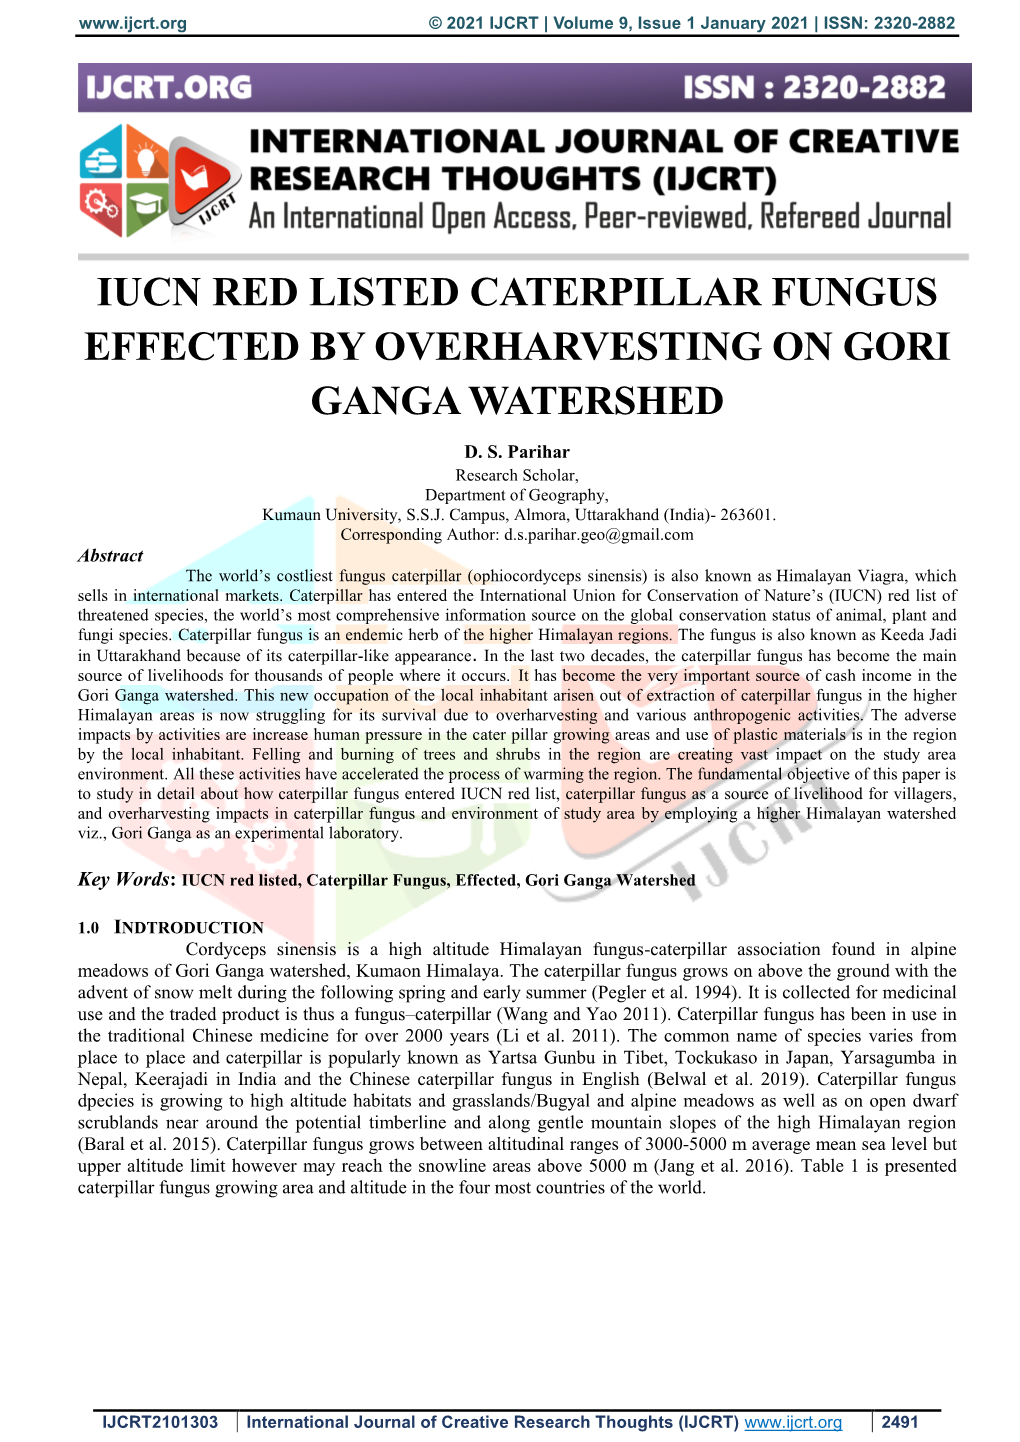 Iucn Red Listed Caterpillar Fungus Effected by Overharvesting on Gori Ganga Watershed